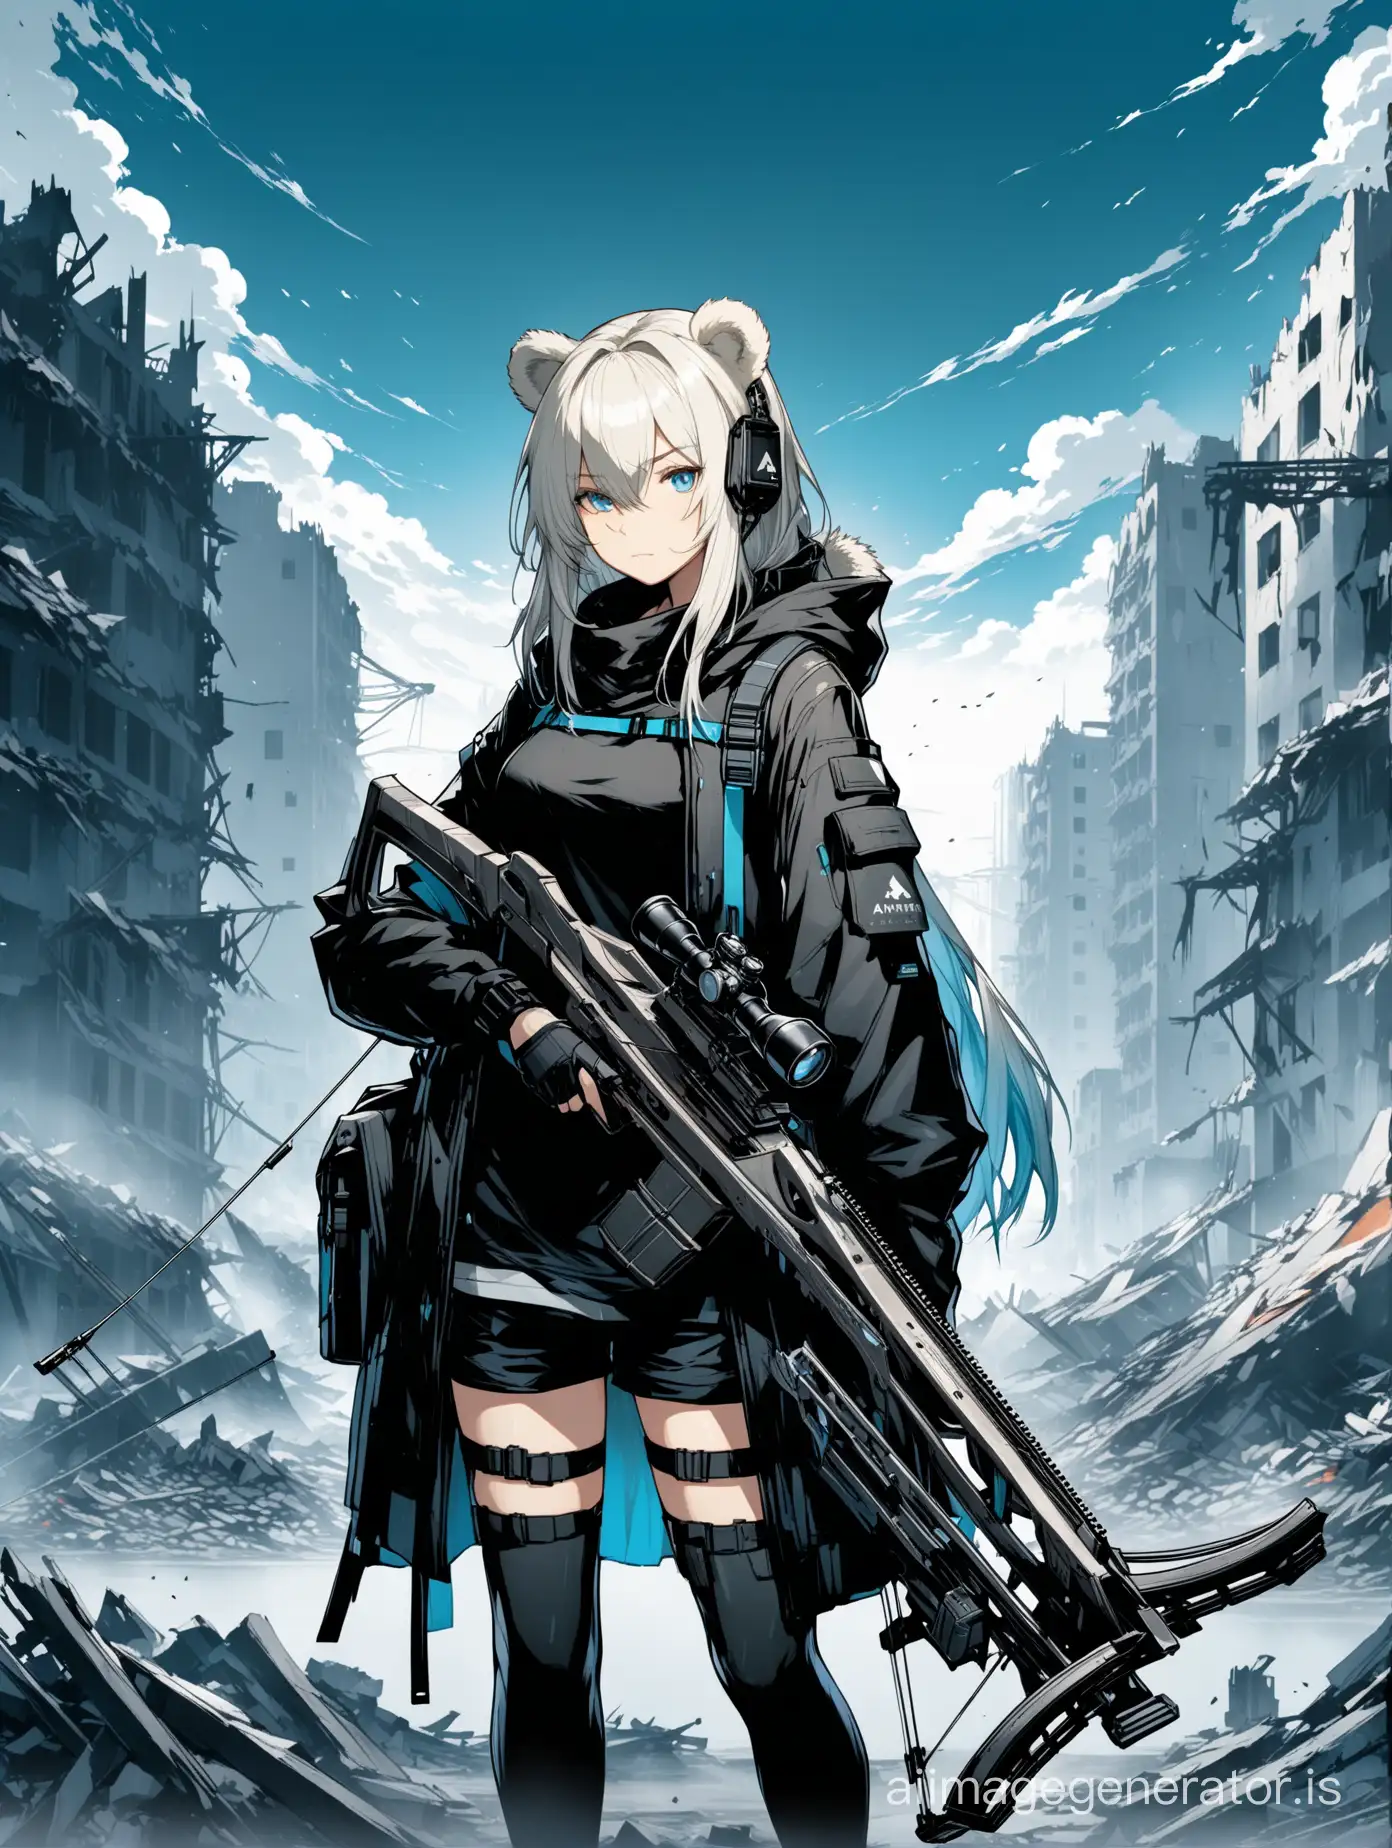 Ursus-Girl-with-Crossbow-in-Destroyed-Cityscape